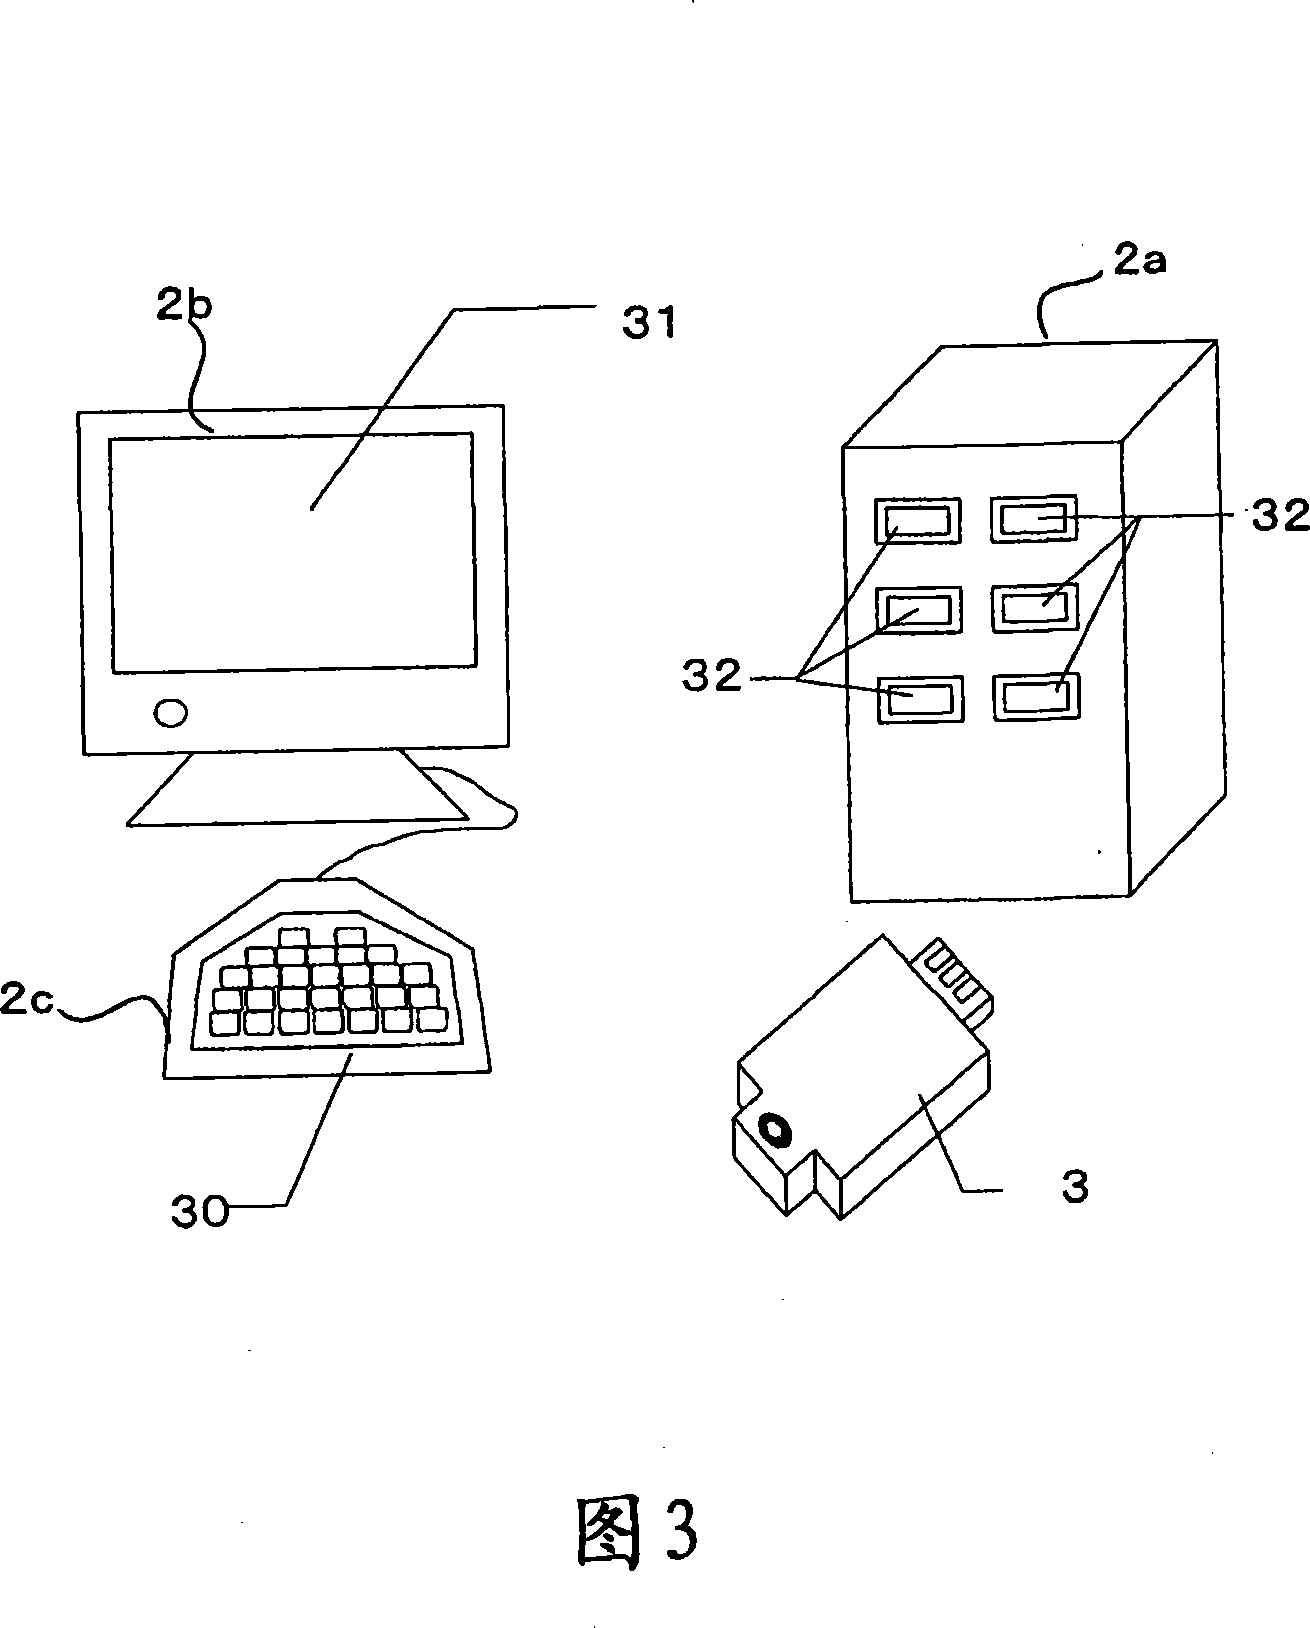 A microchemical analysis device, a micro mixing device, and a microchemical analysis system